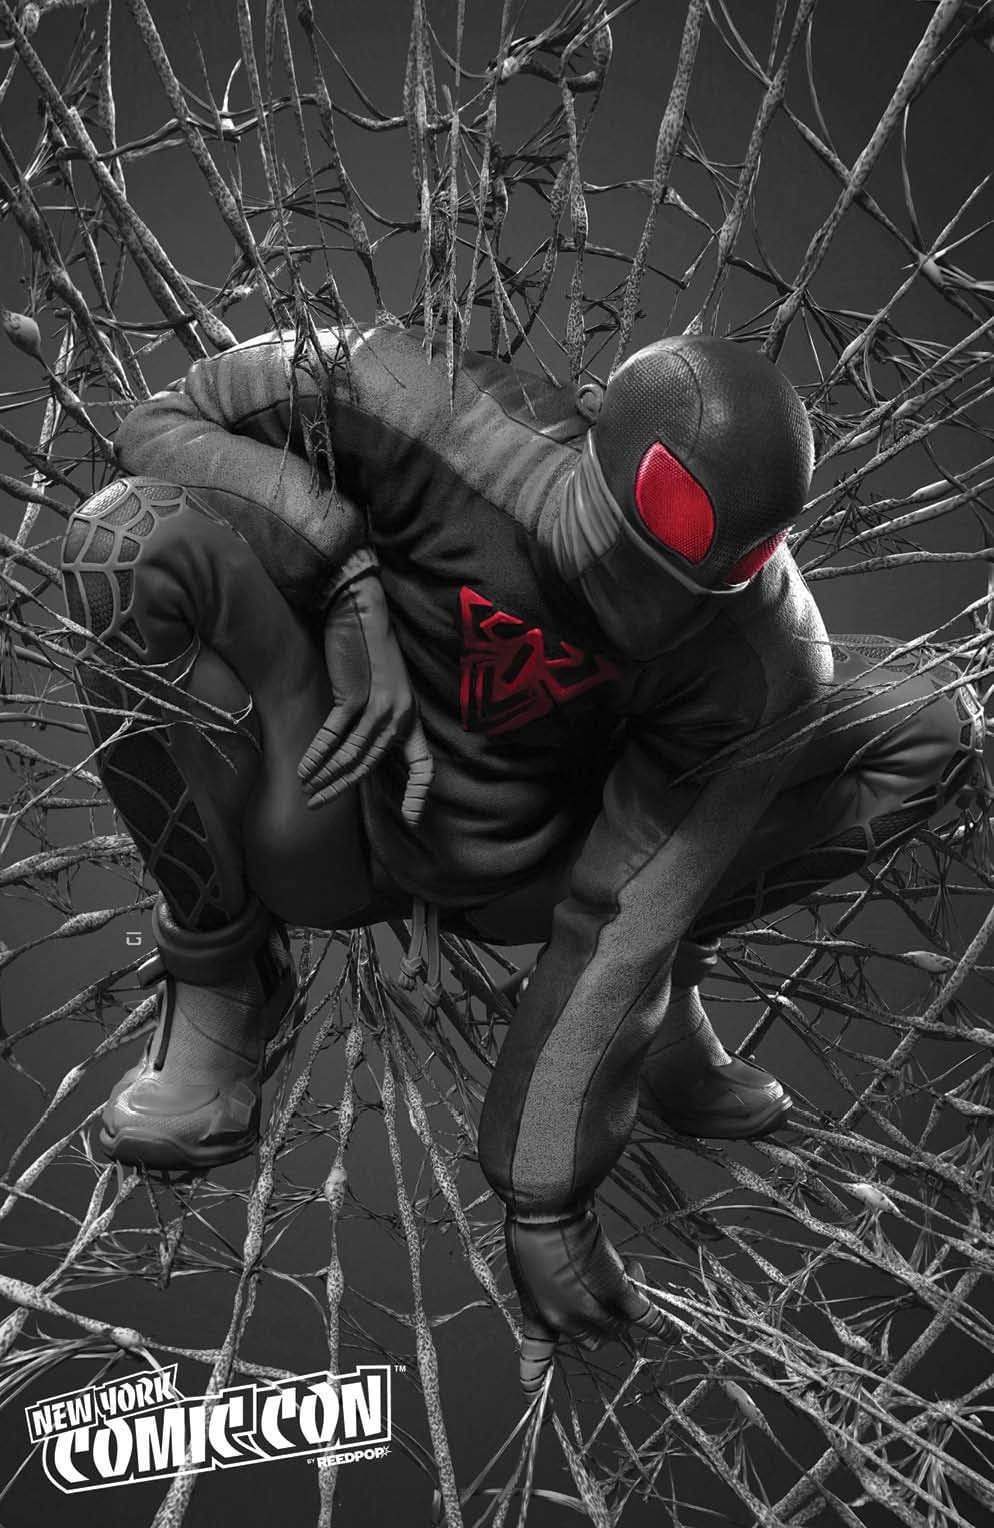 REVISIT MARVEL'S SPIDER-MAN: MILES MORALES IN AN ALL-NEW POSTER COLLECTION  FEATURING ART FROM THE G :: Blog :: Dark Horse Comics, spider man